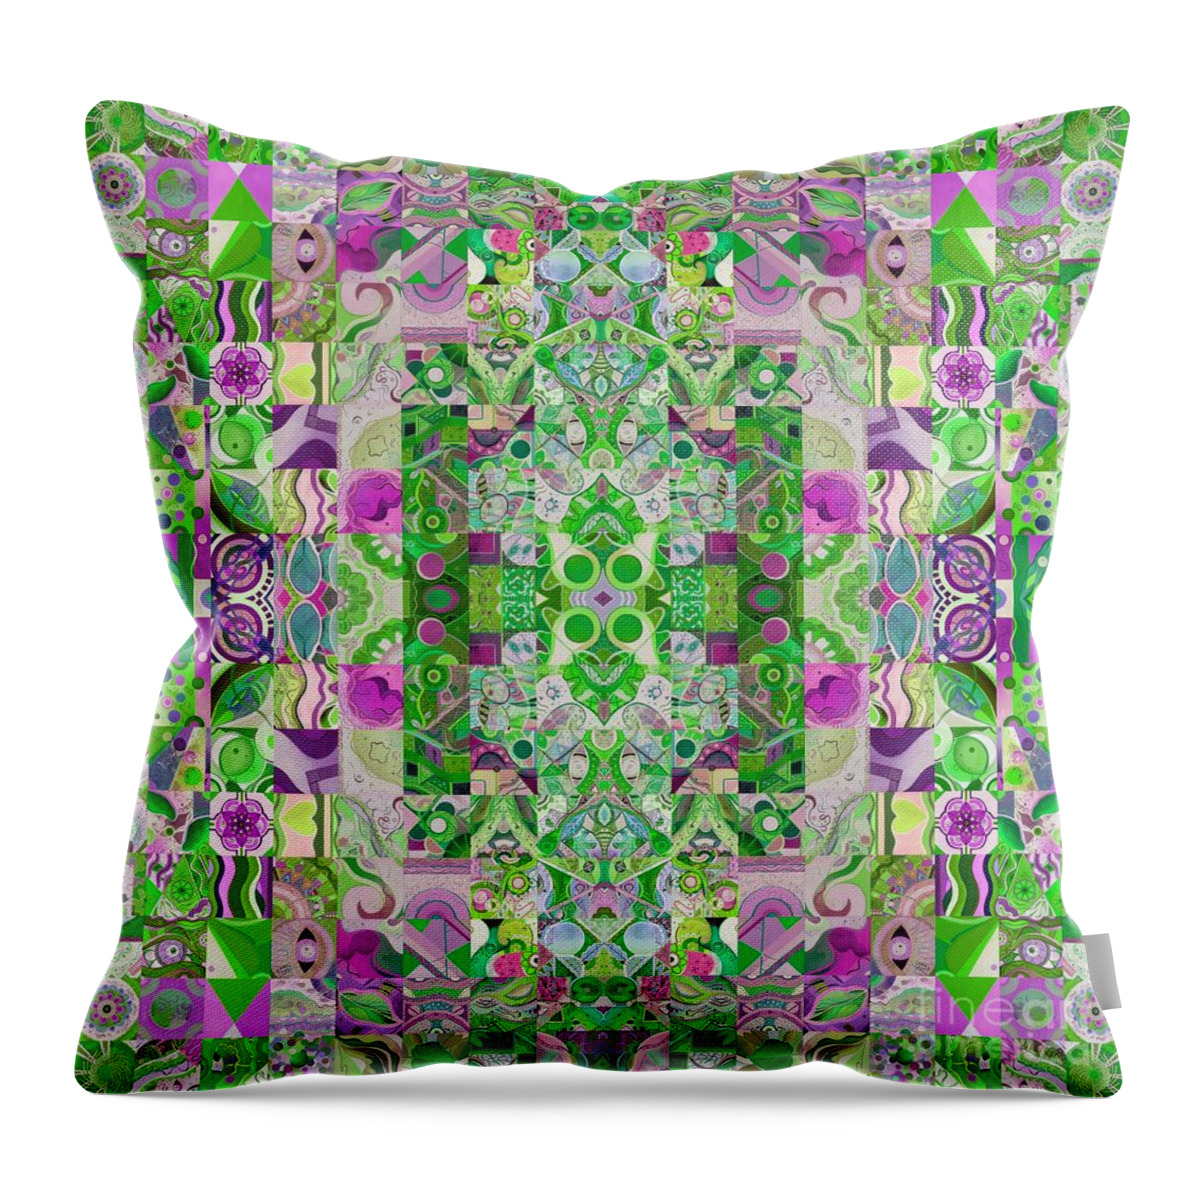 The Joy Of Design 64 Quadrupled 8 Sping Variation By Helena Tiainen Throw Pillow featuring the painting The Joy of Design 64 Quadrupled 8 Spring Variation by Helena Tiainen